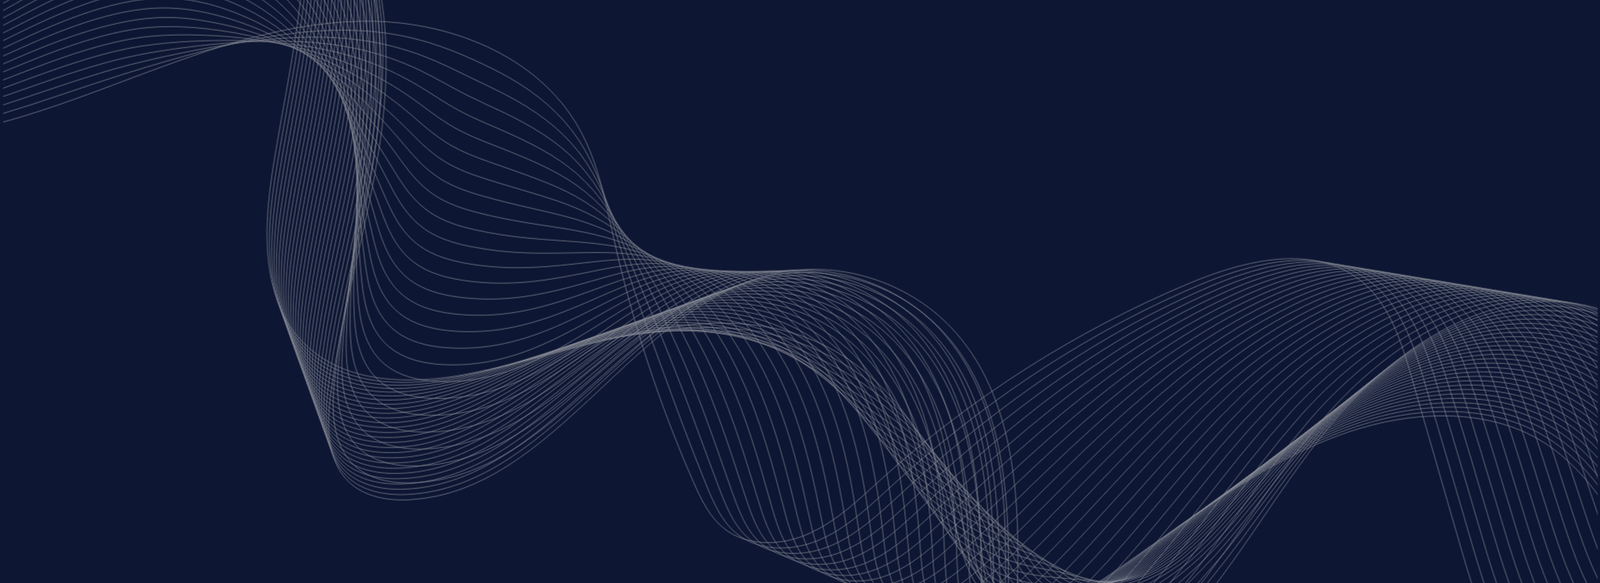 white lines on a navy blue background